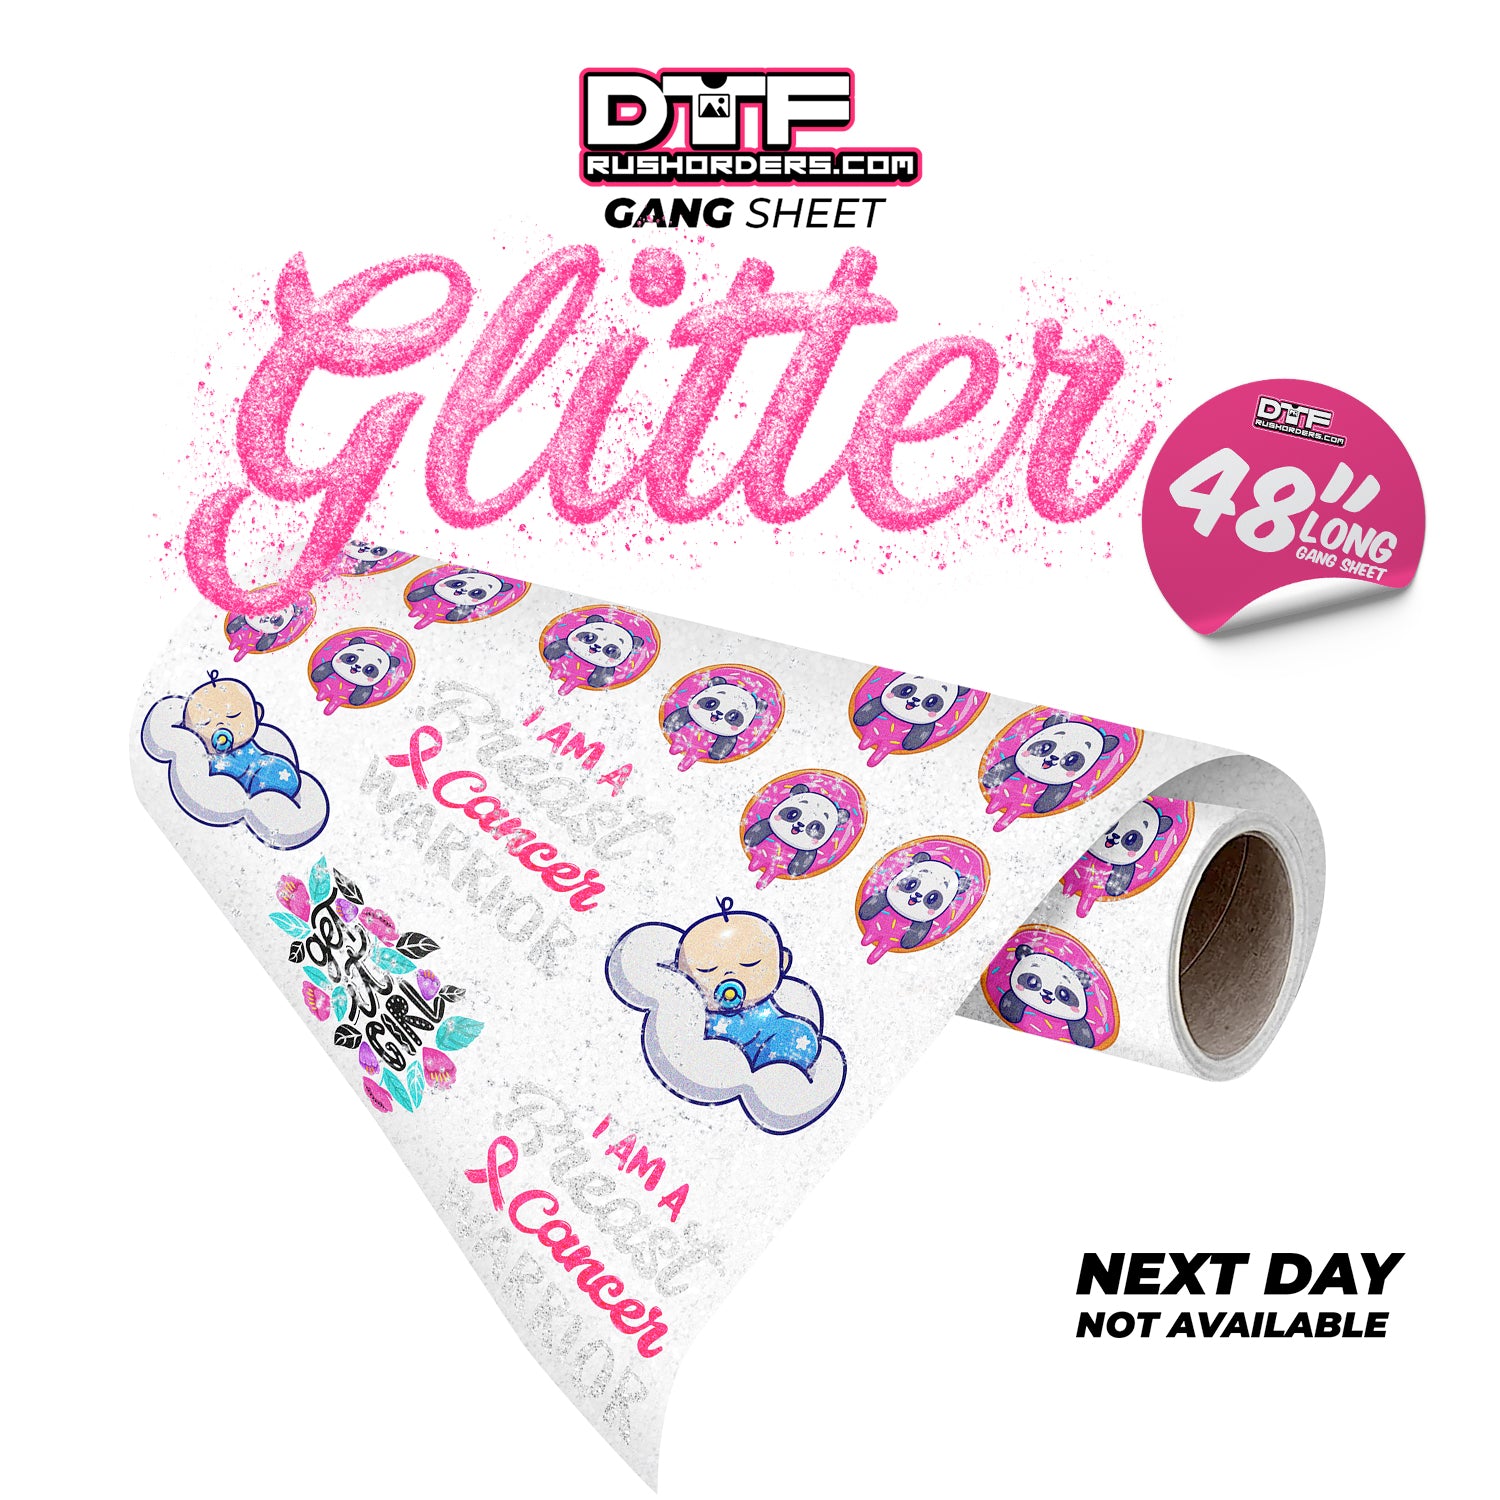 Shimmering Glitter Transfers: Add Sparkle and Style to Your Creations!